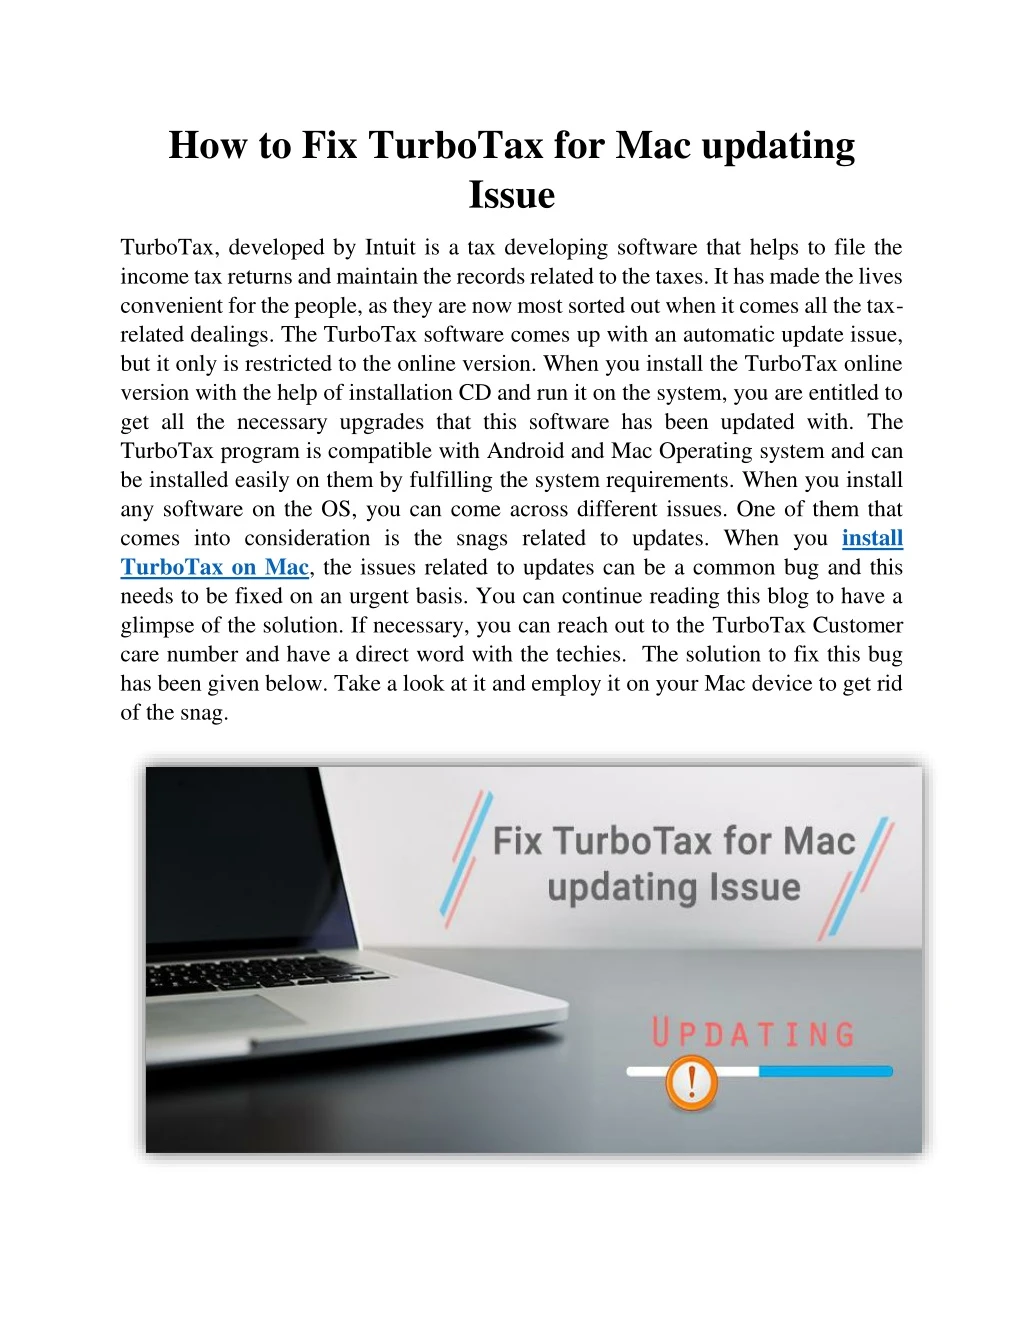 how to fix turbotax for mac updating issue